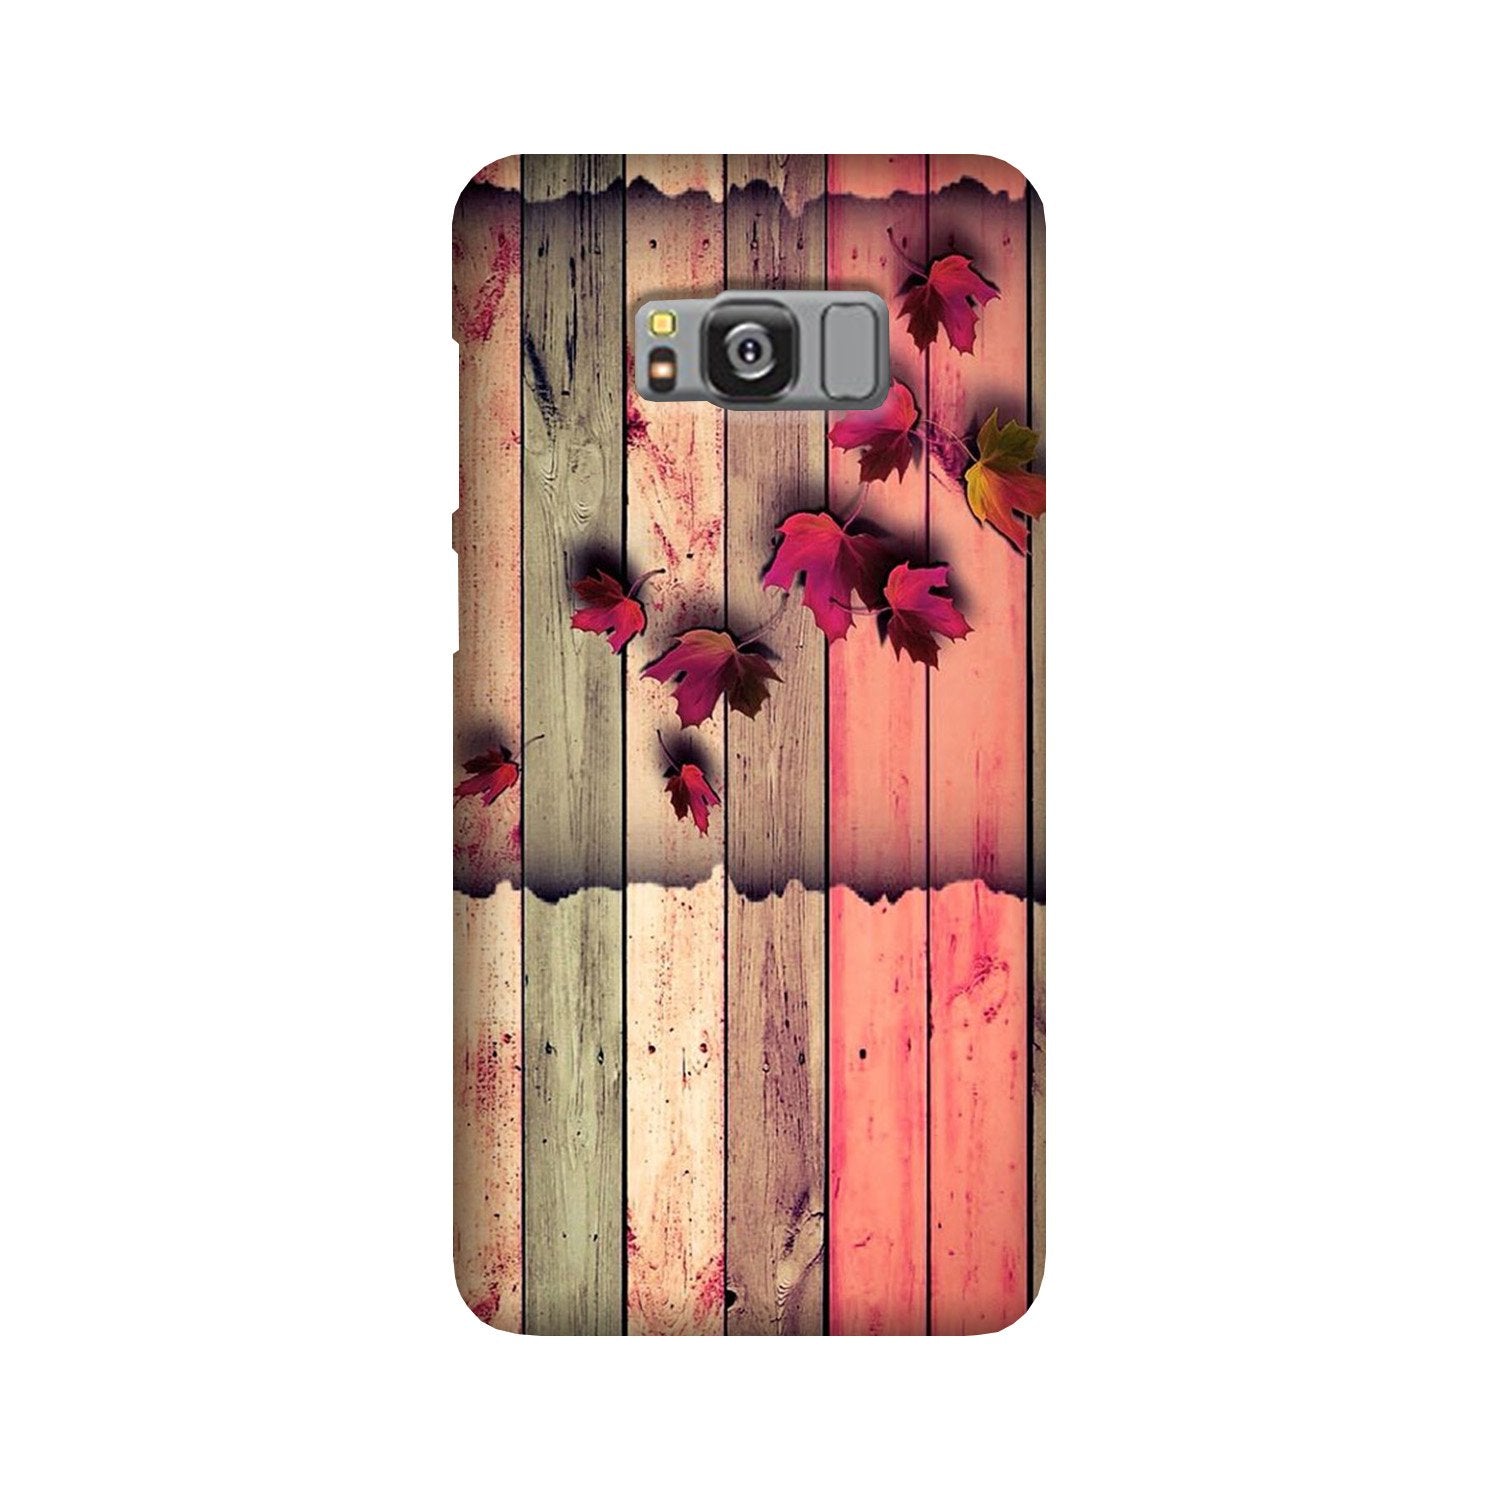 Wooden look2 Case for Galaxy S8